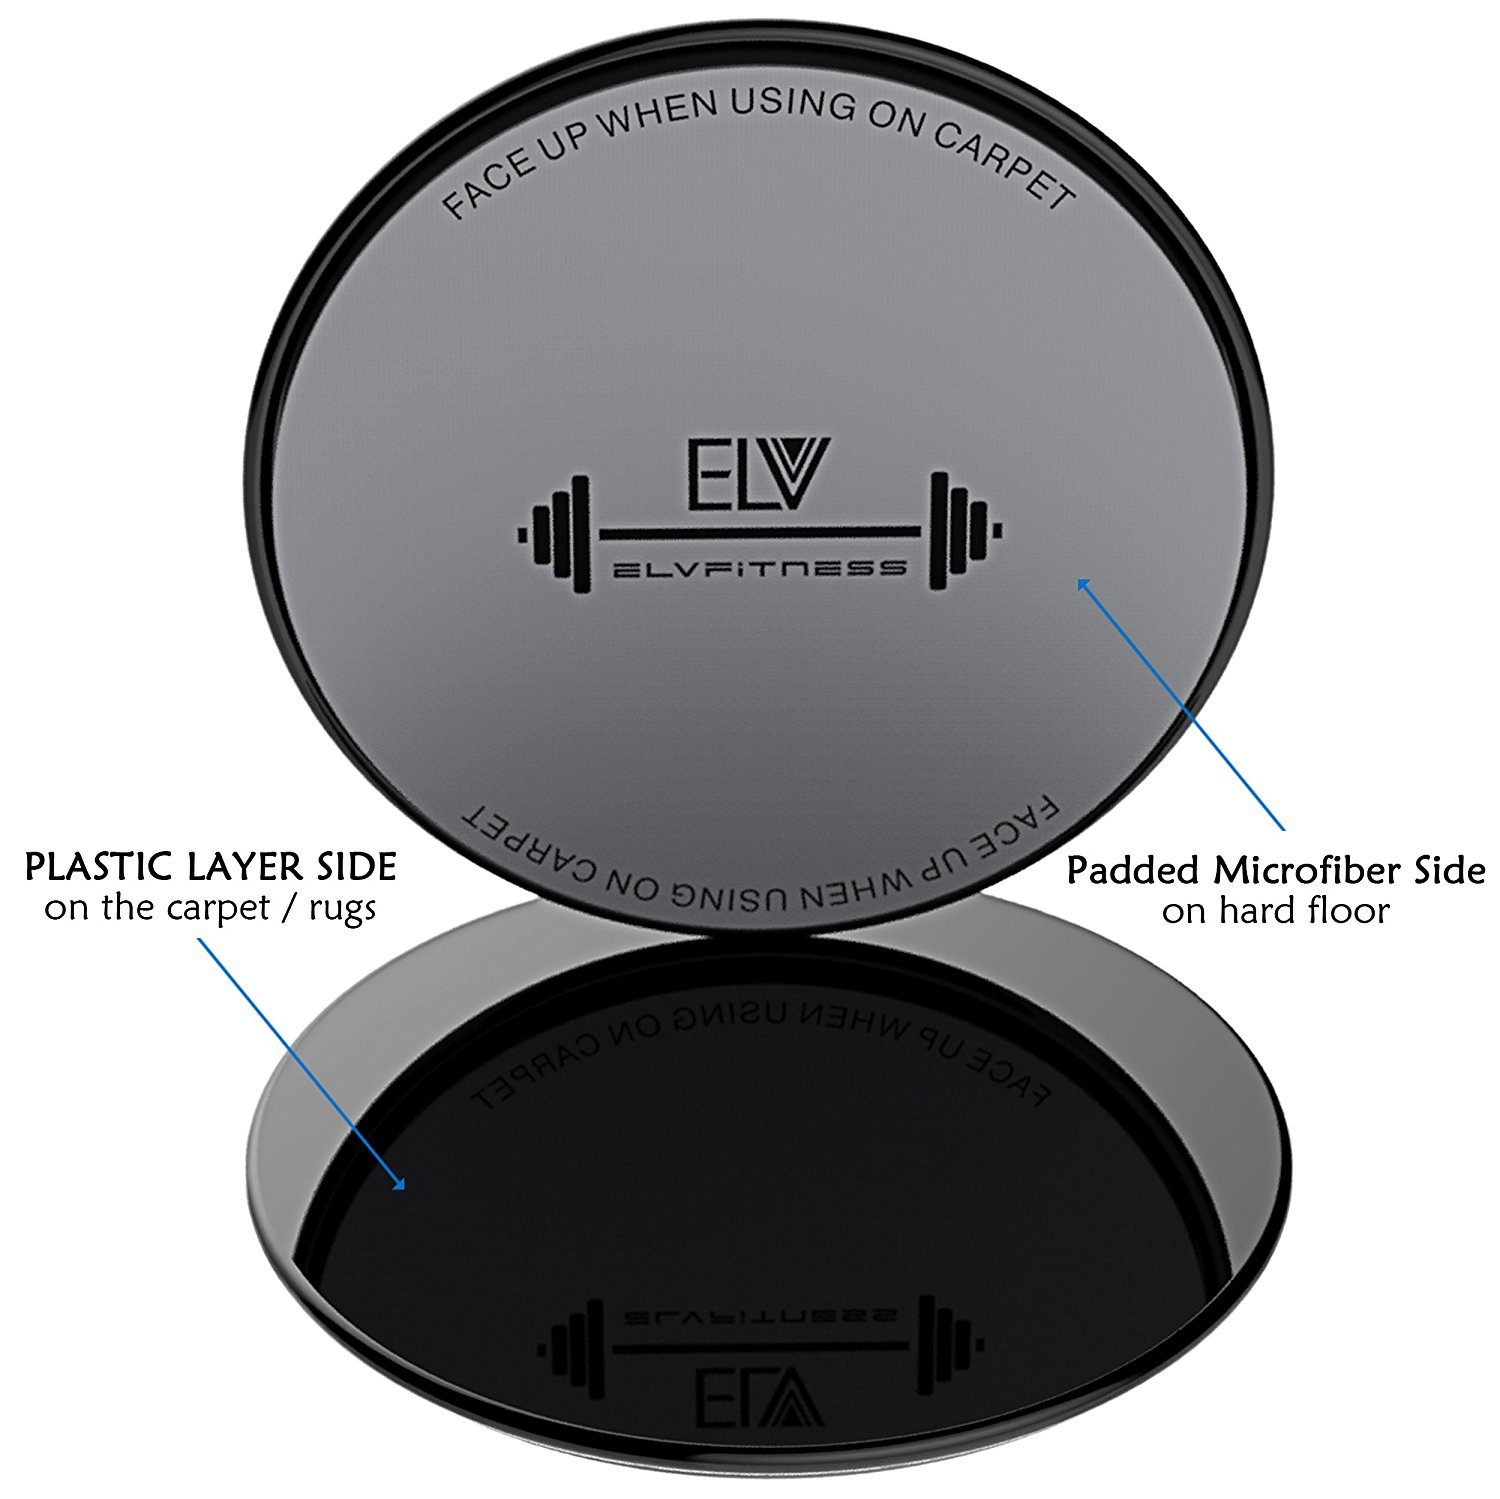 ELV Rubber Exercise Band Fitness Set with Sliders |5 Bands + 2 Discs| - image 4 of 7